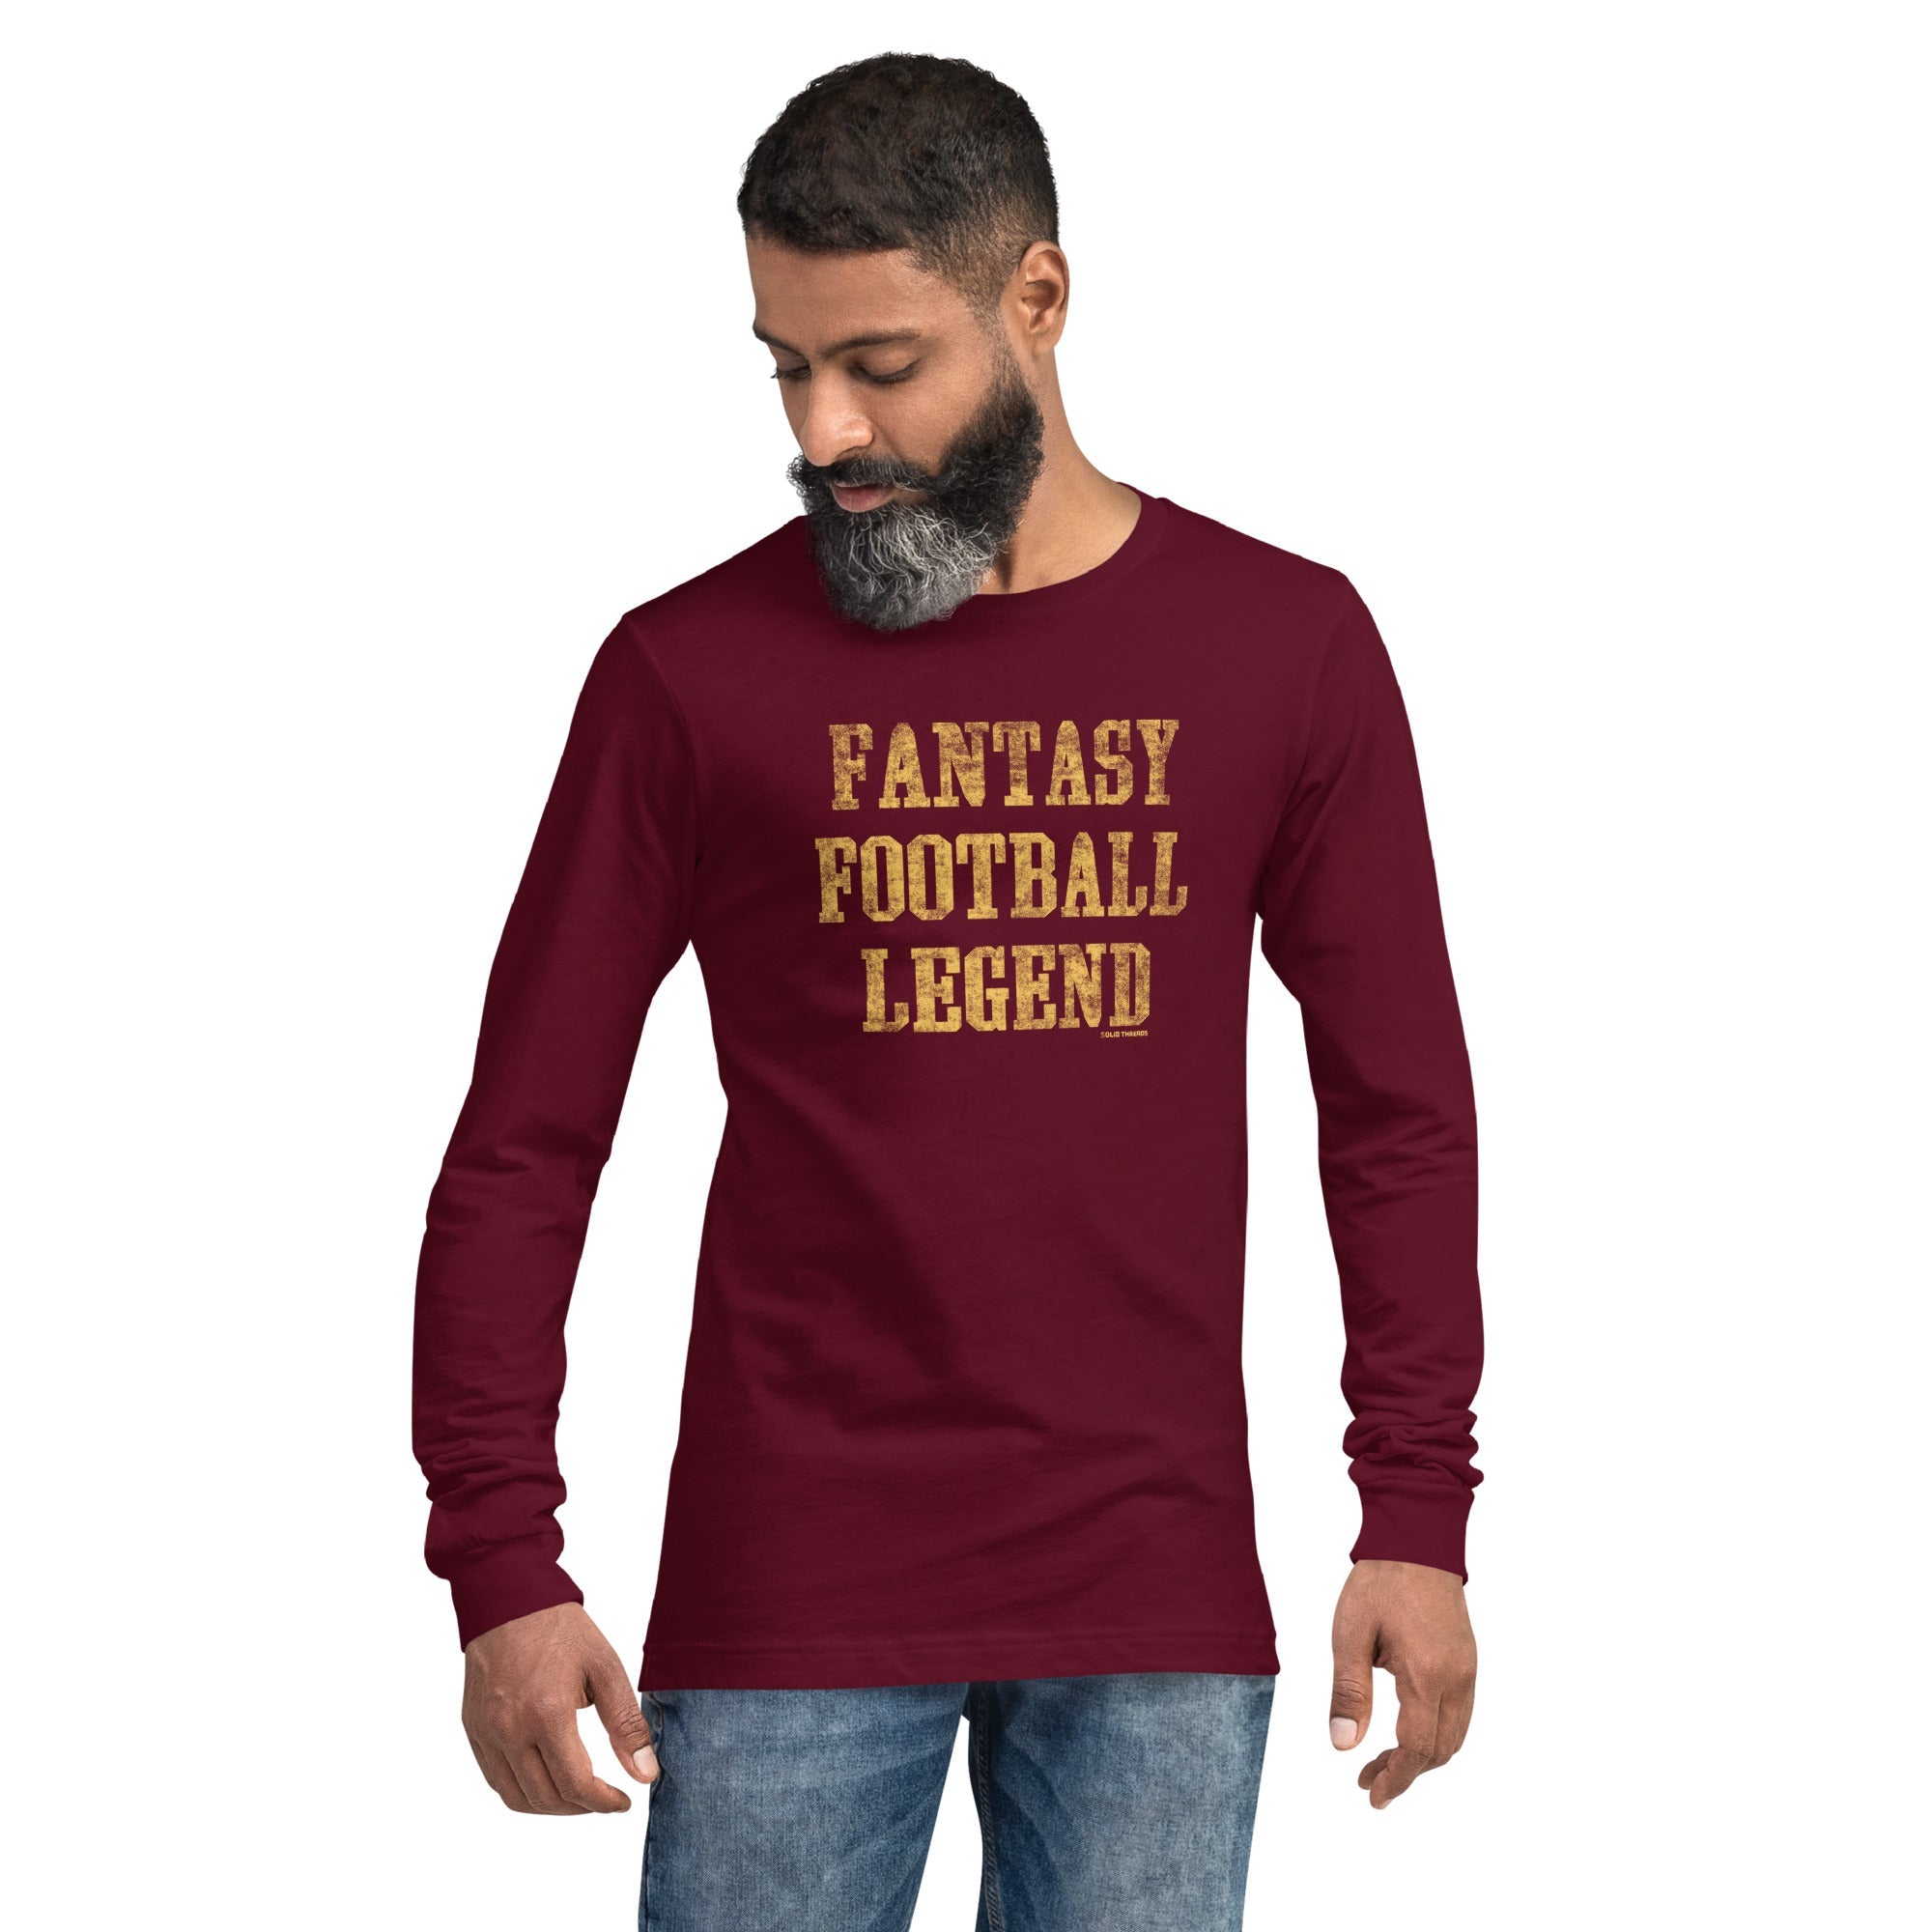 Men’s Fantasy Football Legend Vintage Graphic Tee | Funny Sports T shirt | Solid Threads